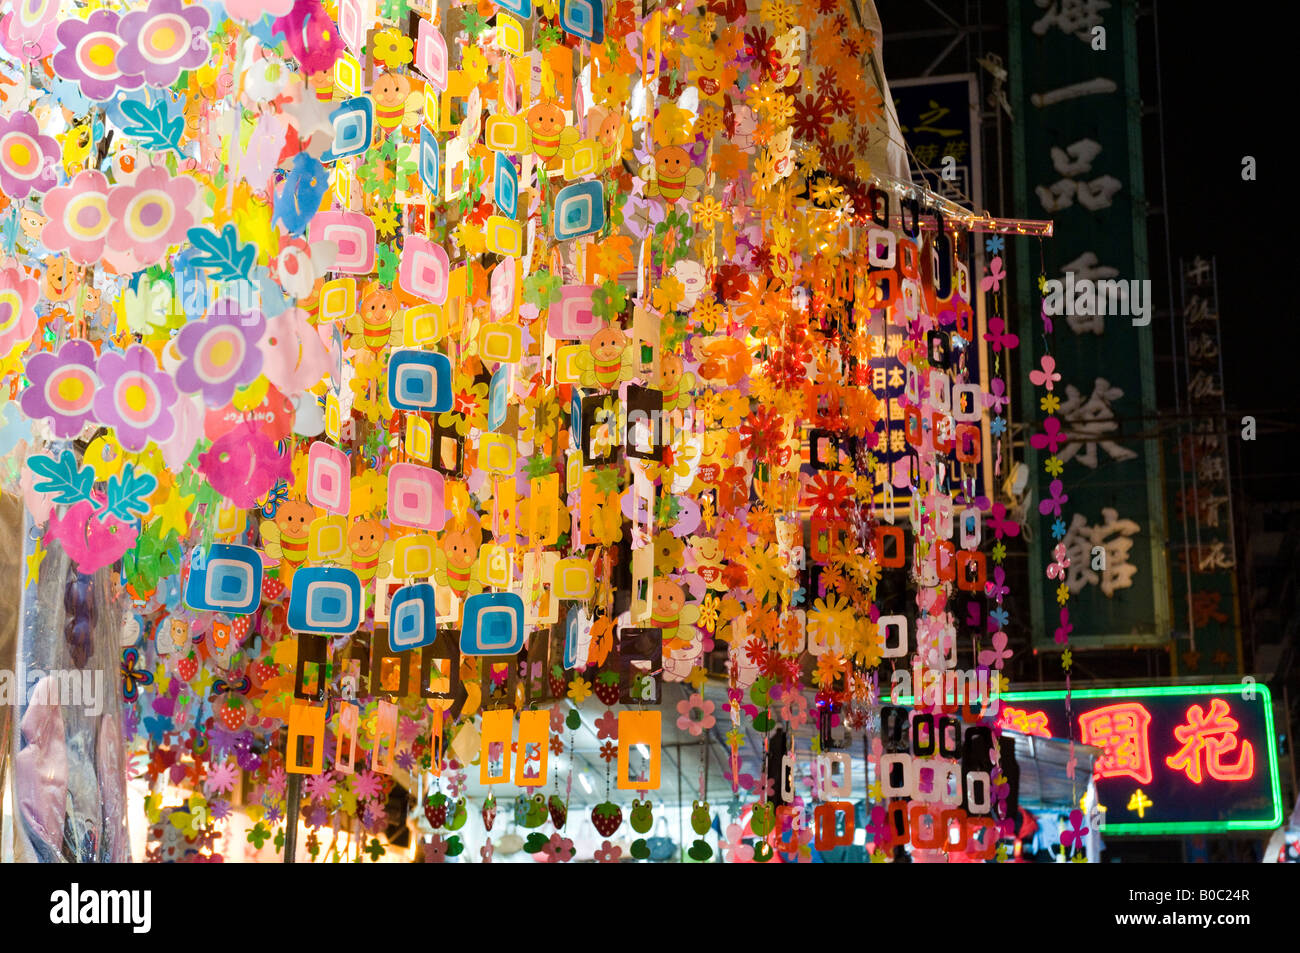 Mobiles, Temple Street Market, Kowloon, Peoples' Republic of China Stock Photo